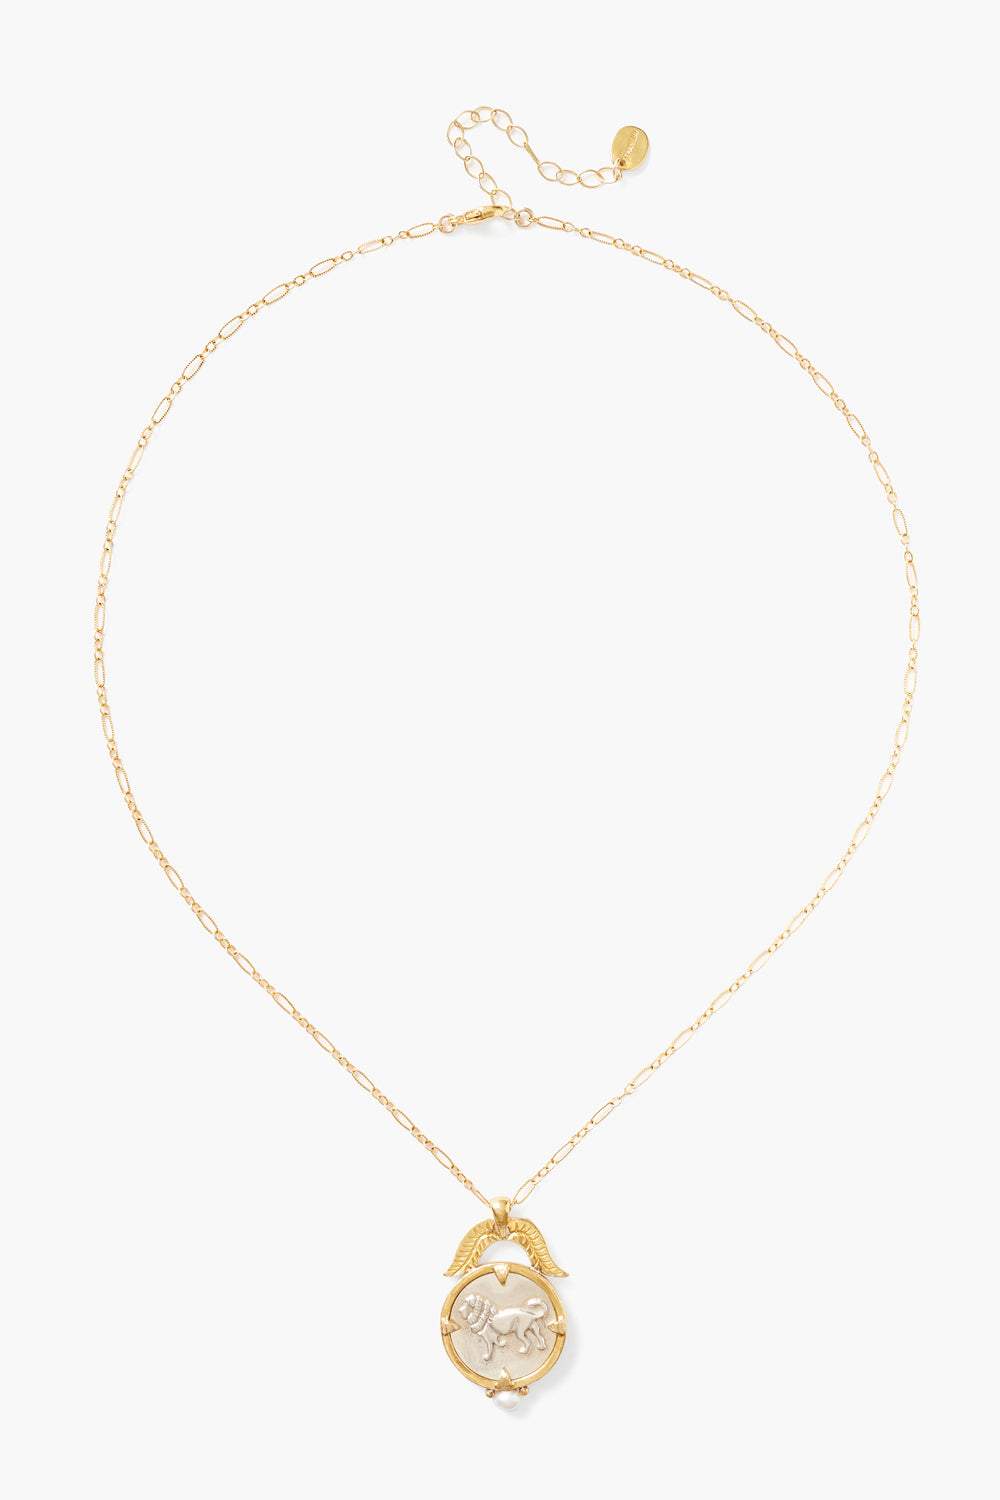 YELLOW GOLD MIX ADJUSTABLE LION COIN CHAIN NECKLACE - Kingfisher Road - Online Boutique